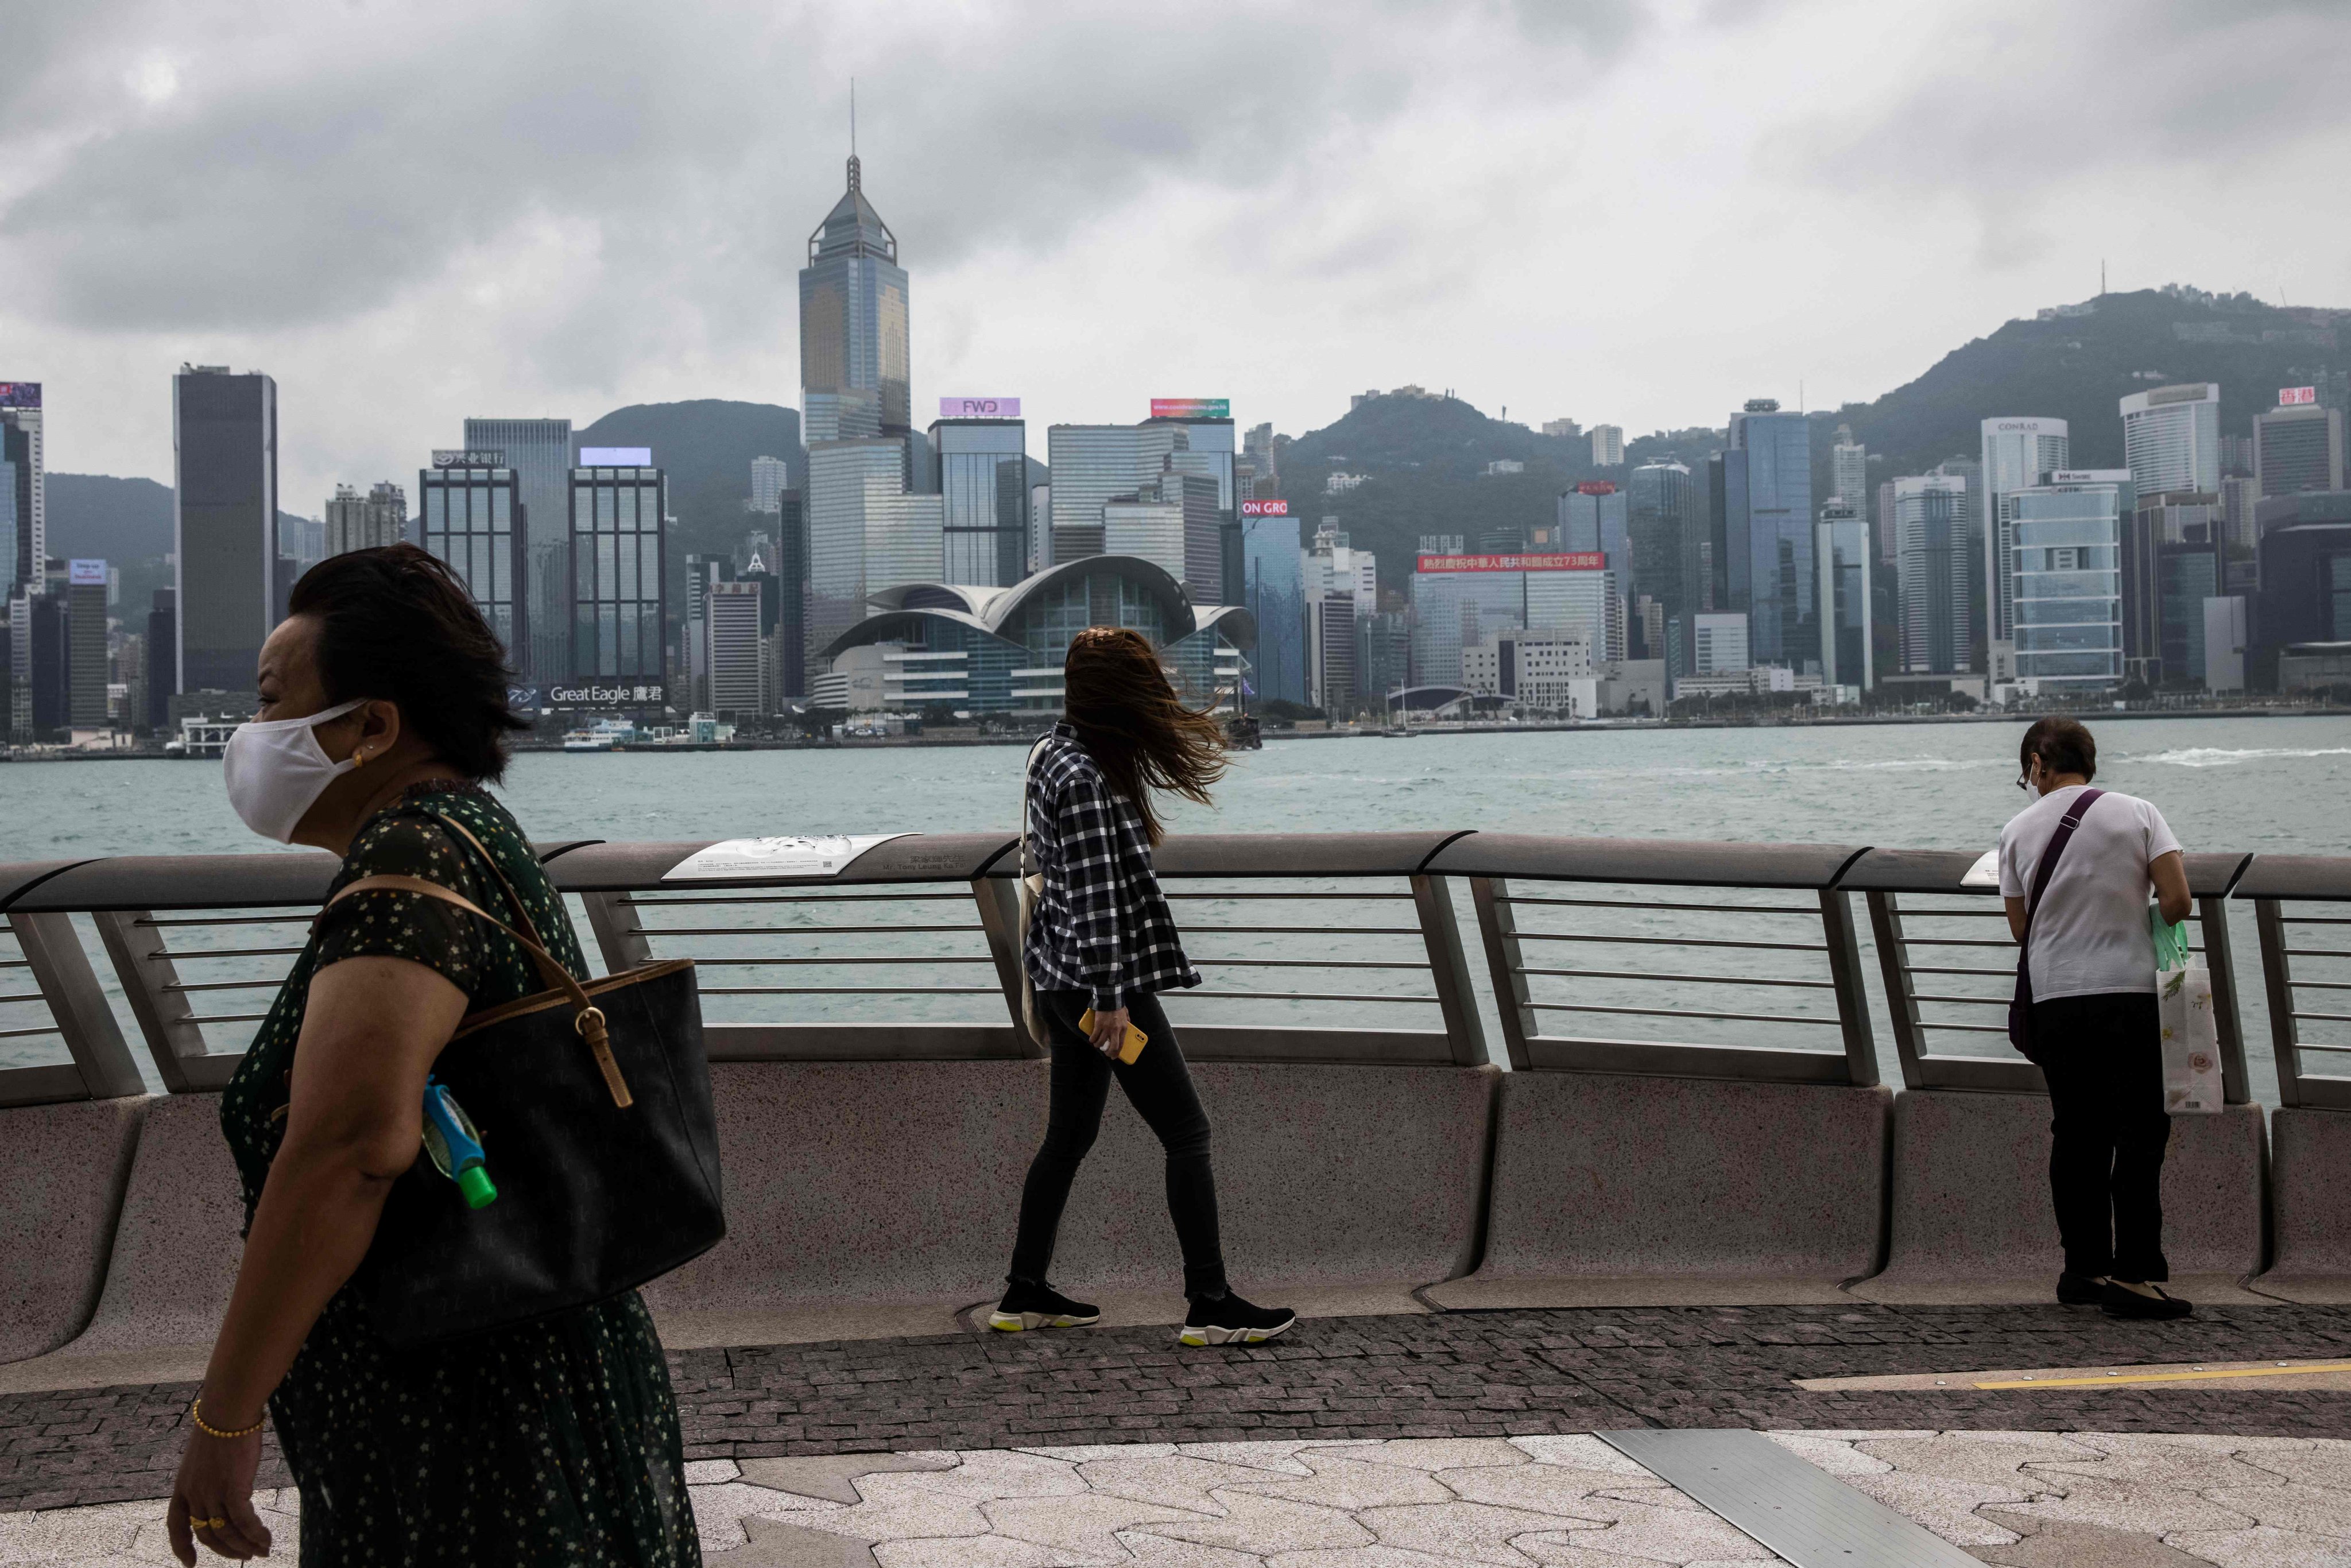 Endowus said it will offer a 100 per cent trailer fee cashback to its clients in Hong Kong. Photo: AFP